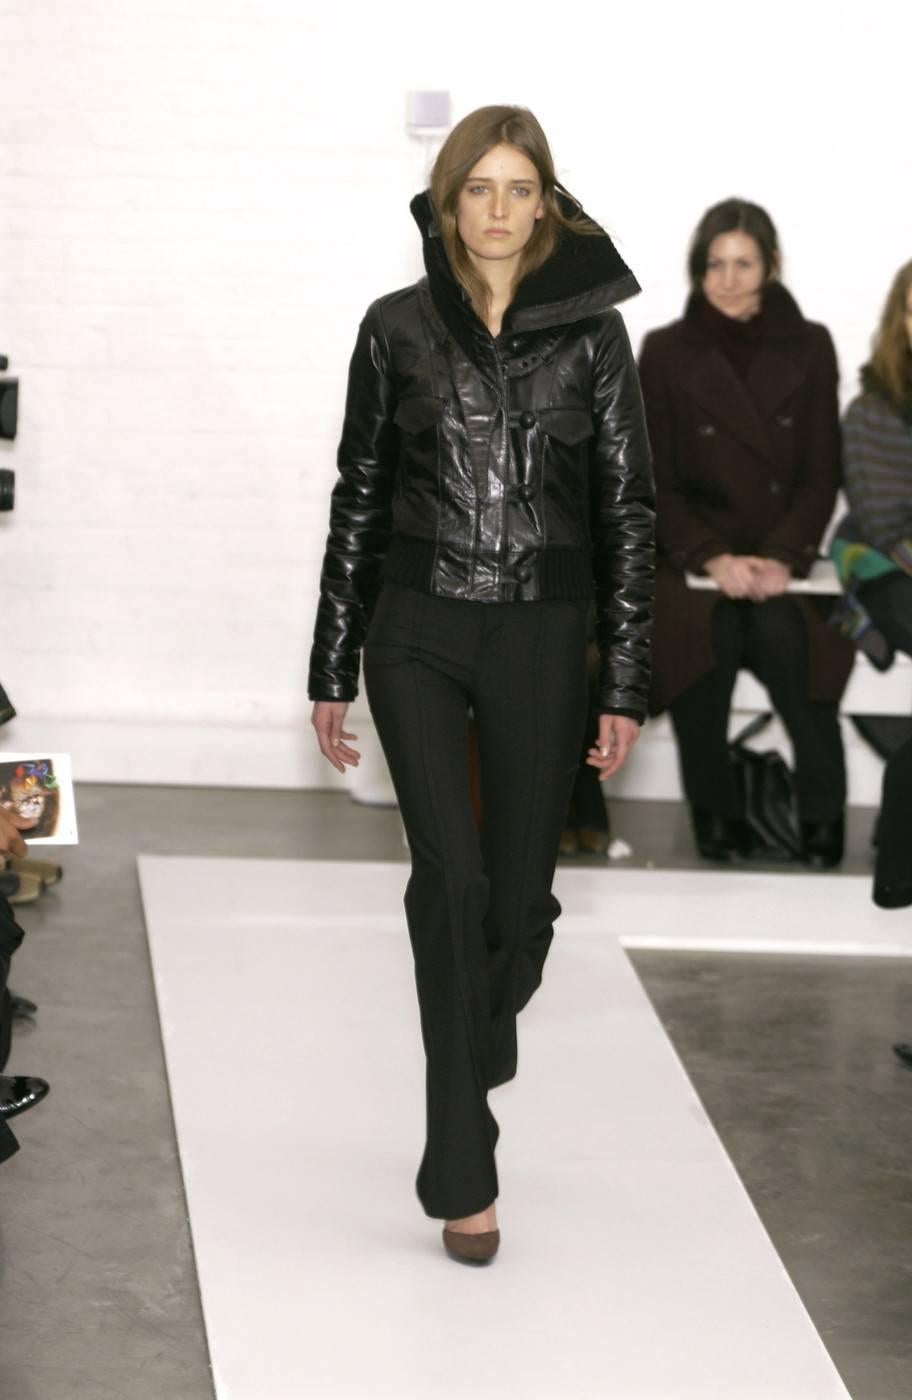 Women's or Men's 2002 BALENCIAGA by Nicolas Ghesquiere black leather runway coat with wool trim